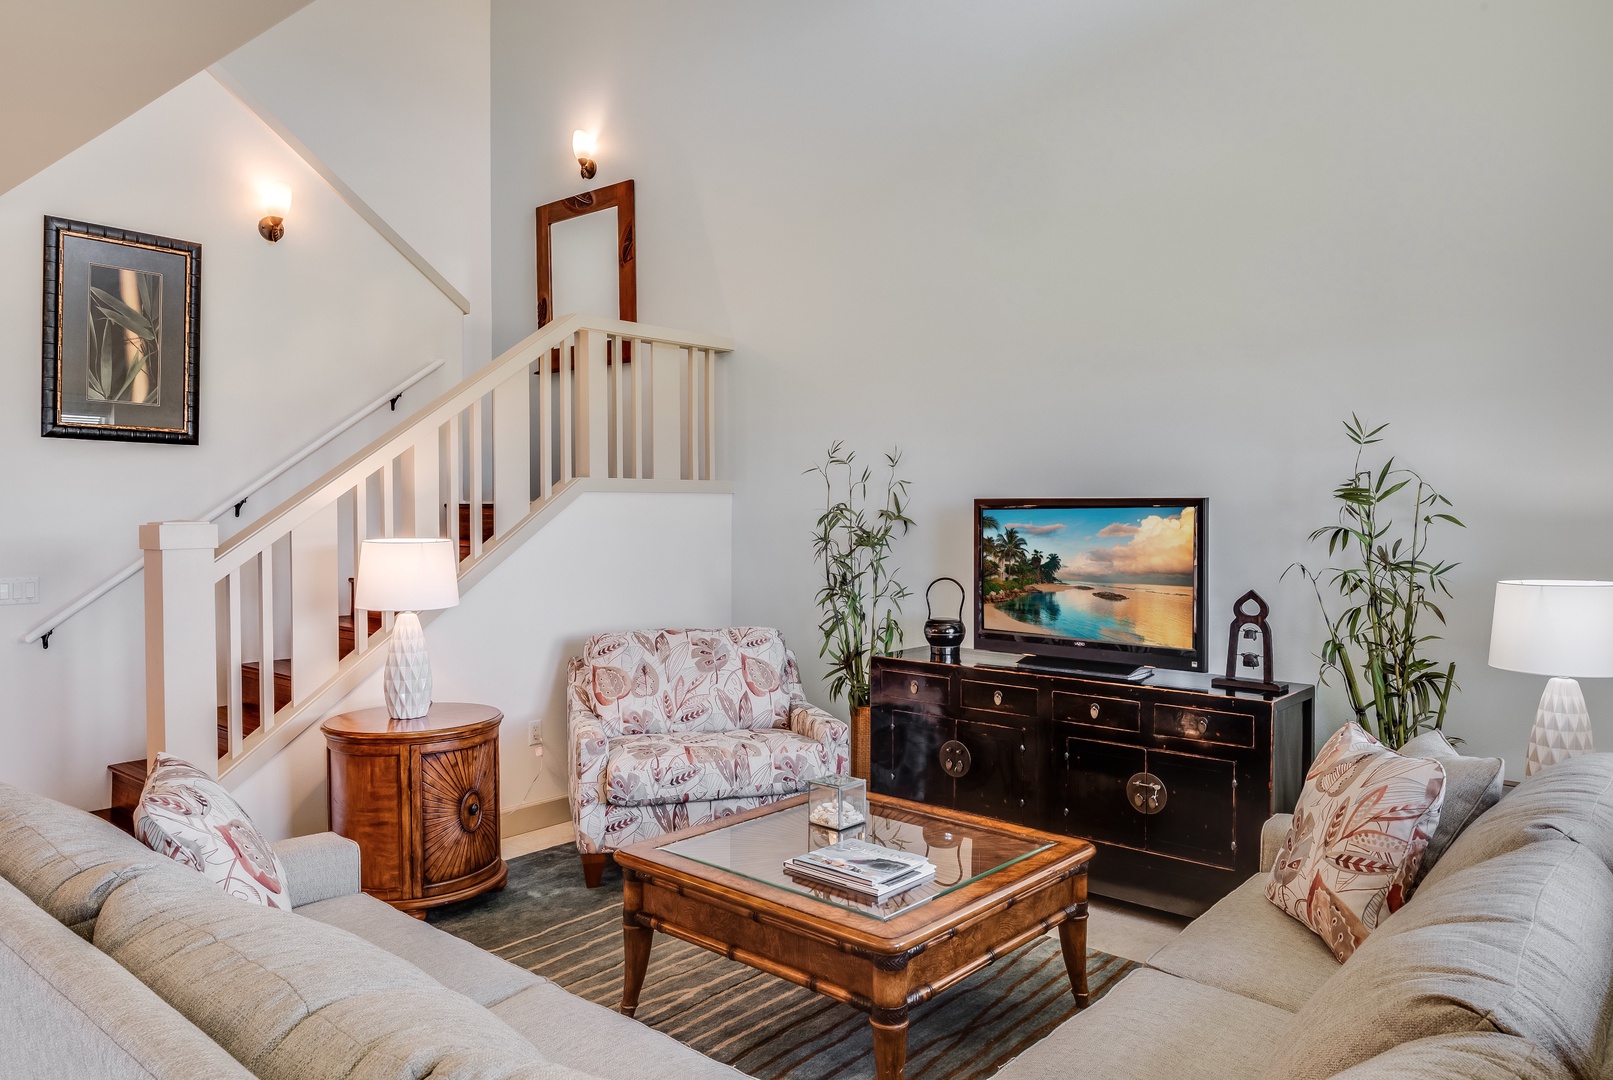 Waikoloa Vacation Rentals, 3BD Hali'i Kai (12G) at Waikoloa Resort - Beautiful & bright living room with two-story ceiling, staircase to second floor bedrooms